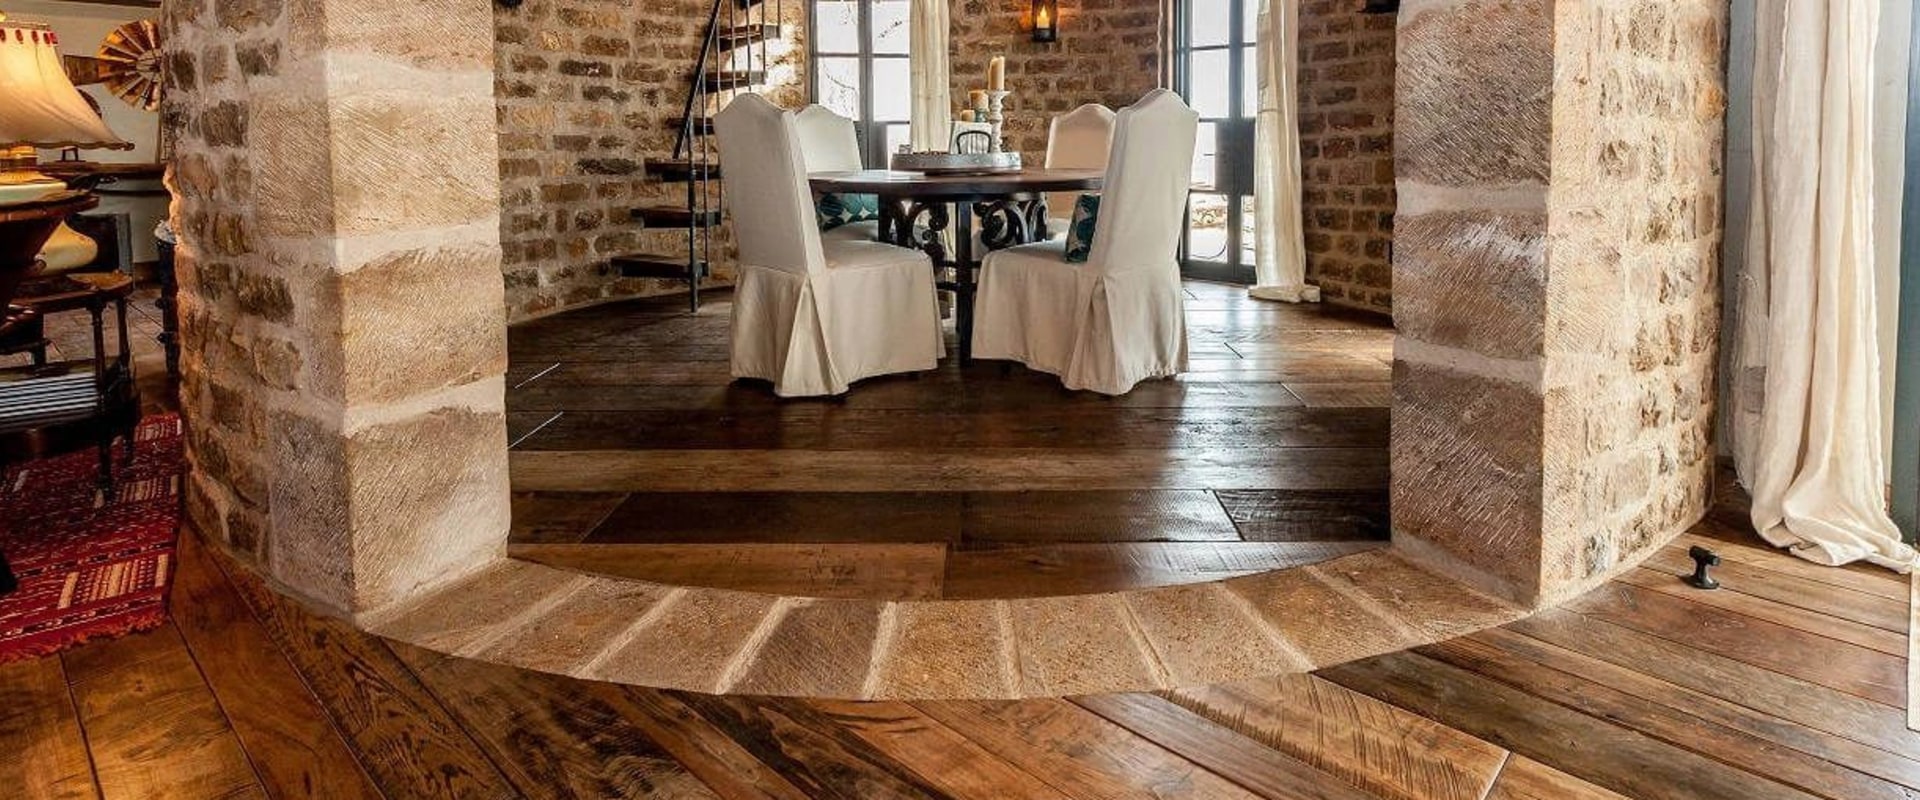 What flooring adds most value to home?